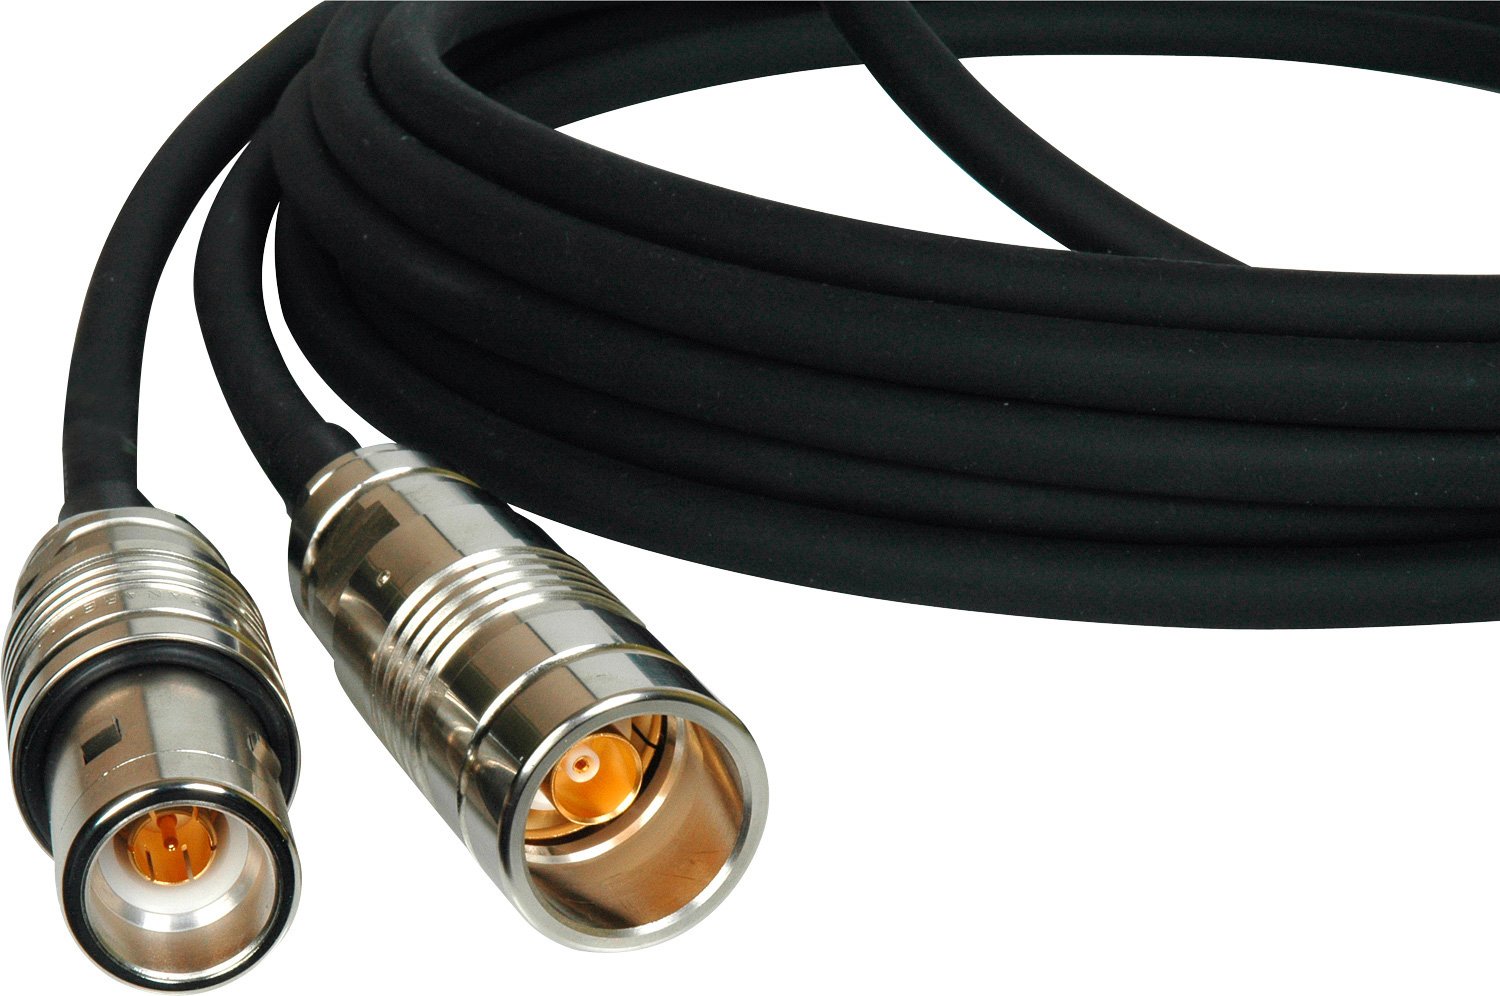 Laird TRI-1857A-150 Belden 1857A RG59/U Stranded Triax Male to Female Cable - 150 Foot